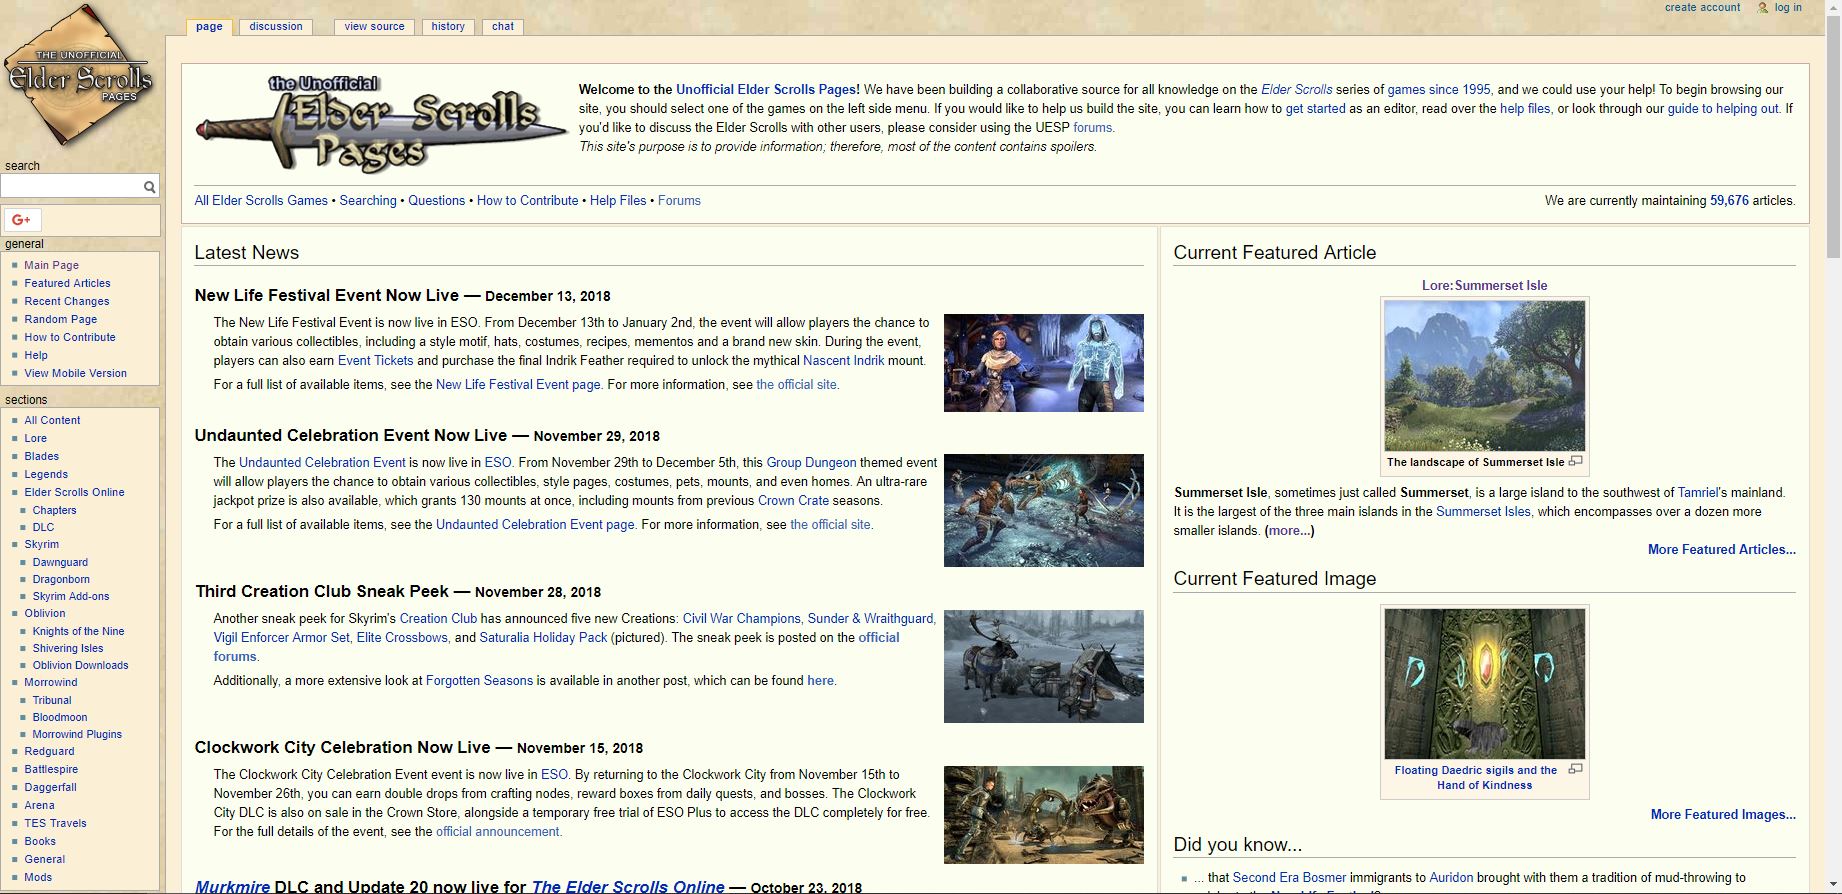 Web page entitled The Unofficial Elder Scrolls Pages